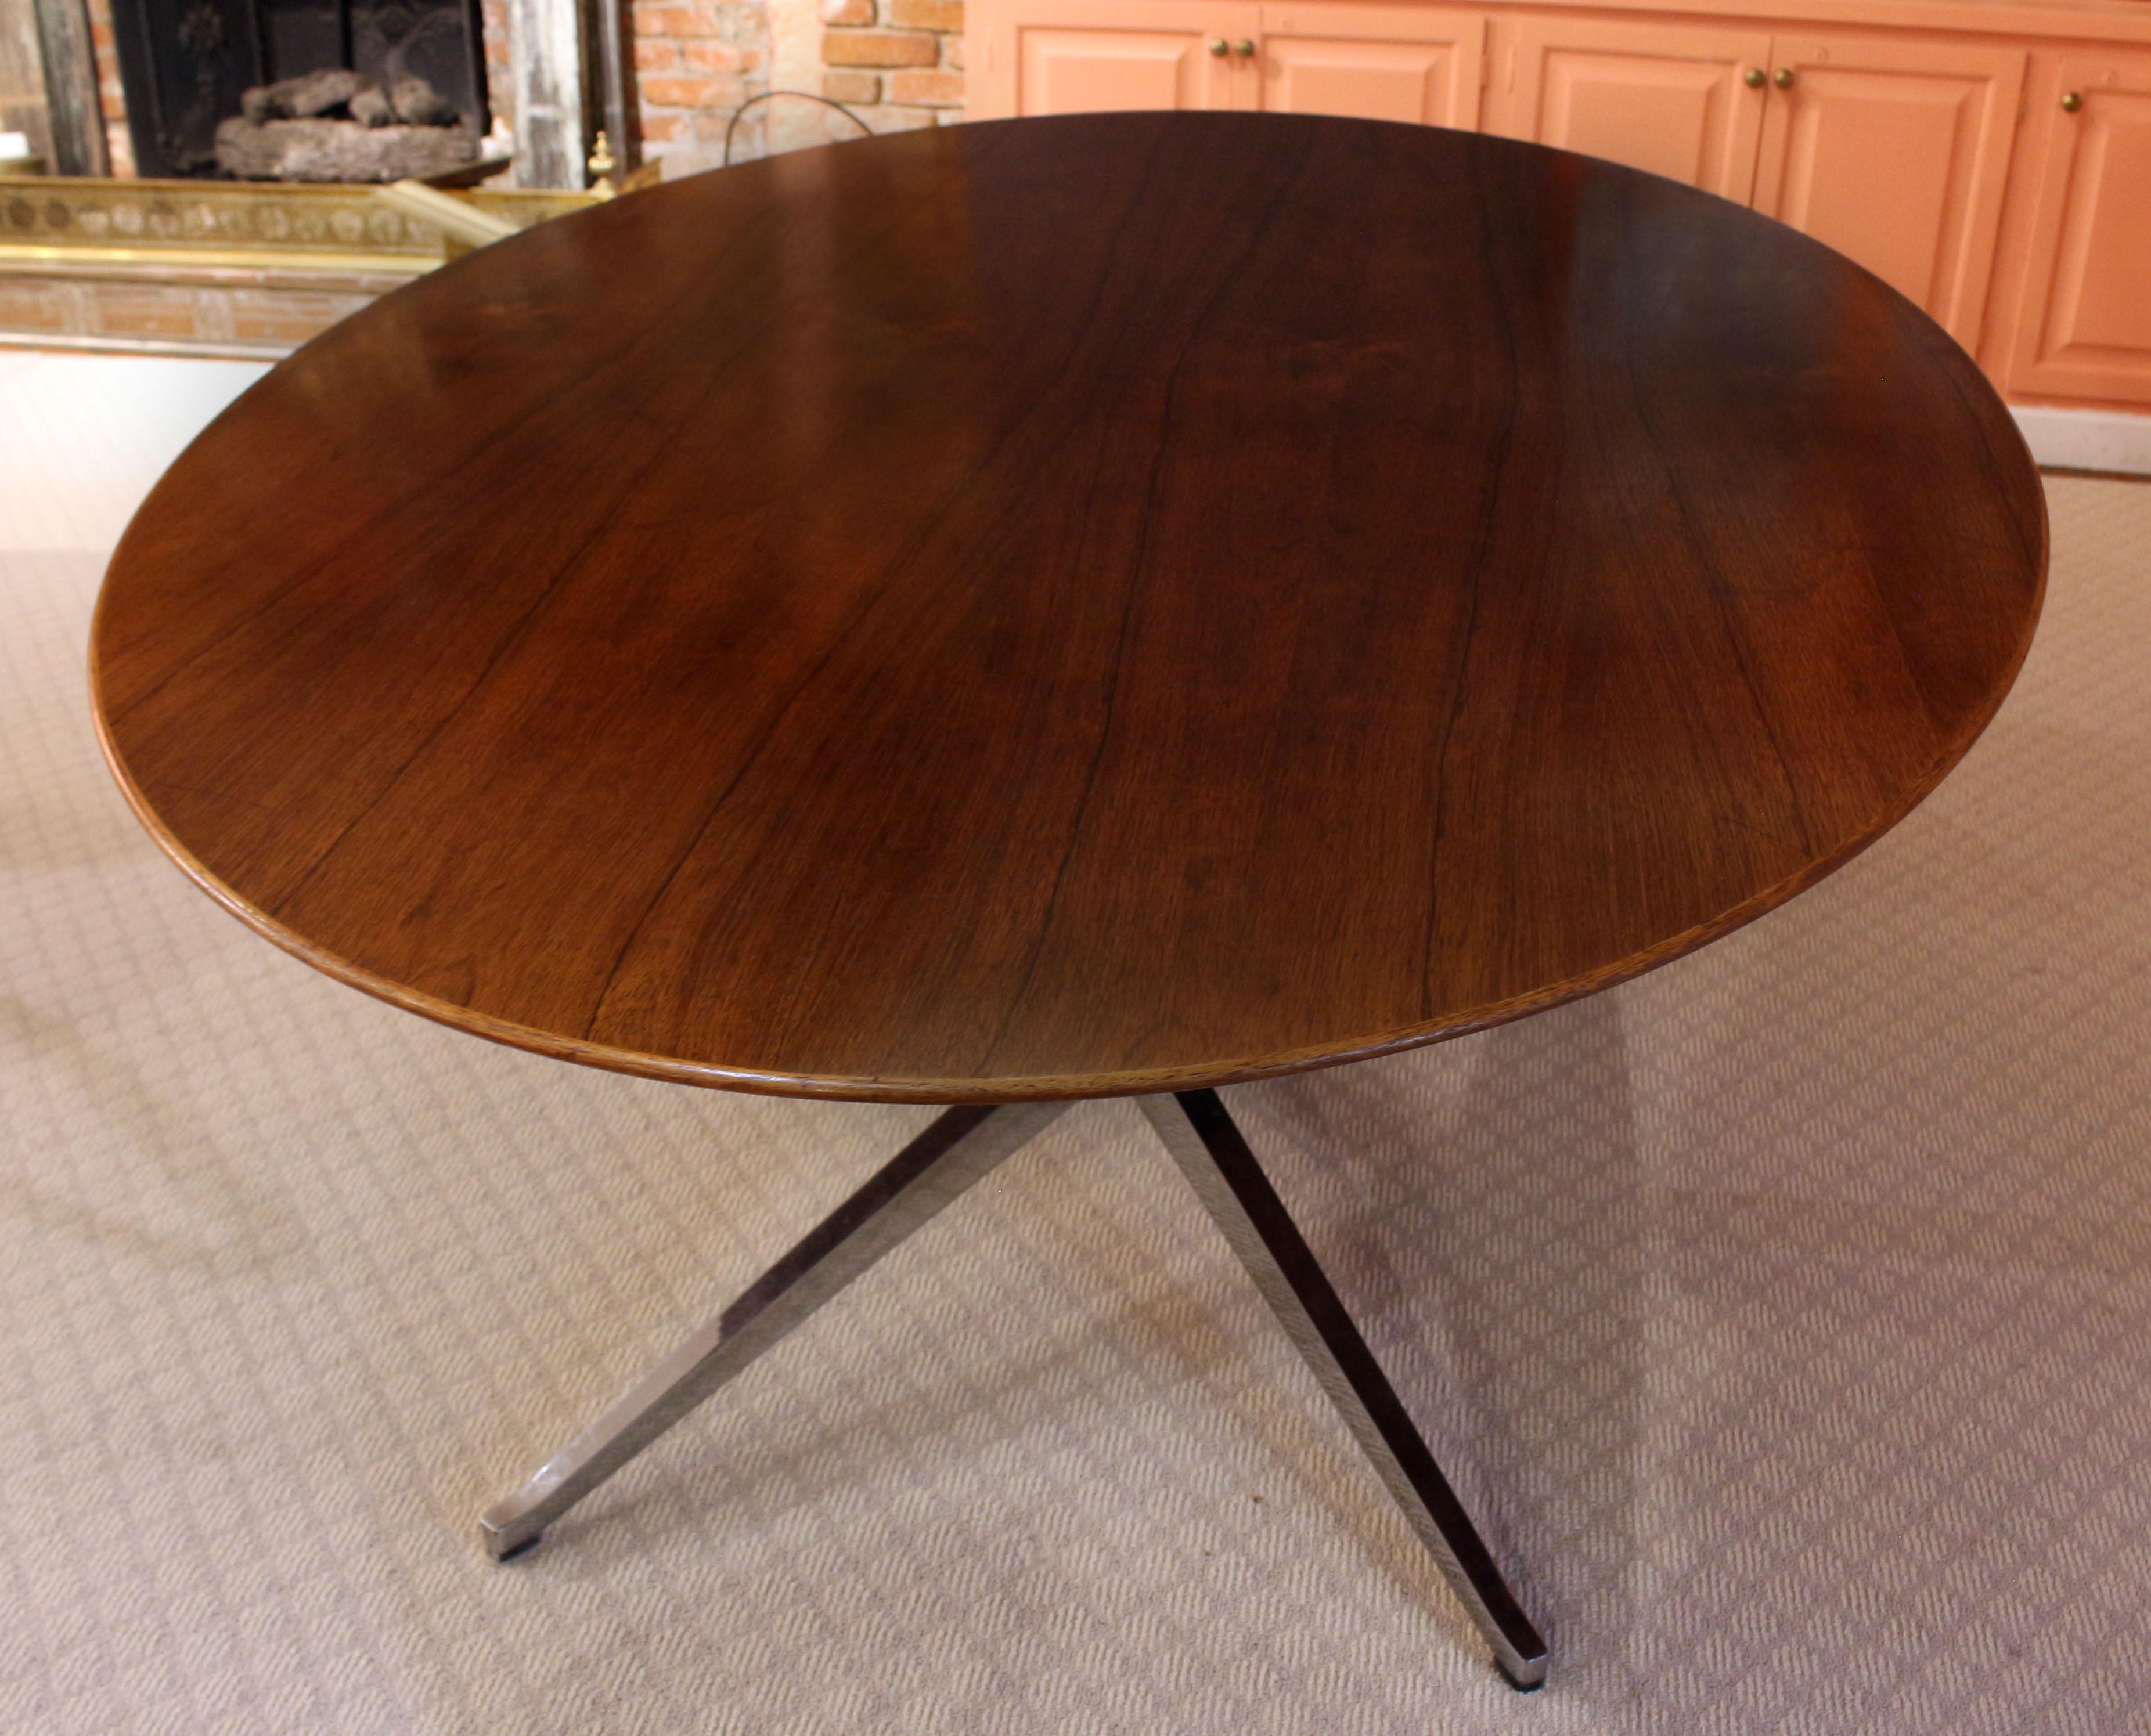 1960s Florence Knoll Oval Dining Table Made by Knoll. Original factory sticker under pedestal table supports: Knoll Associats, Inc, 320 Park Ave, NY, NY. Elegant rosewood veneer top with thin edge bevelling to a thicker slab creating a sleek,